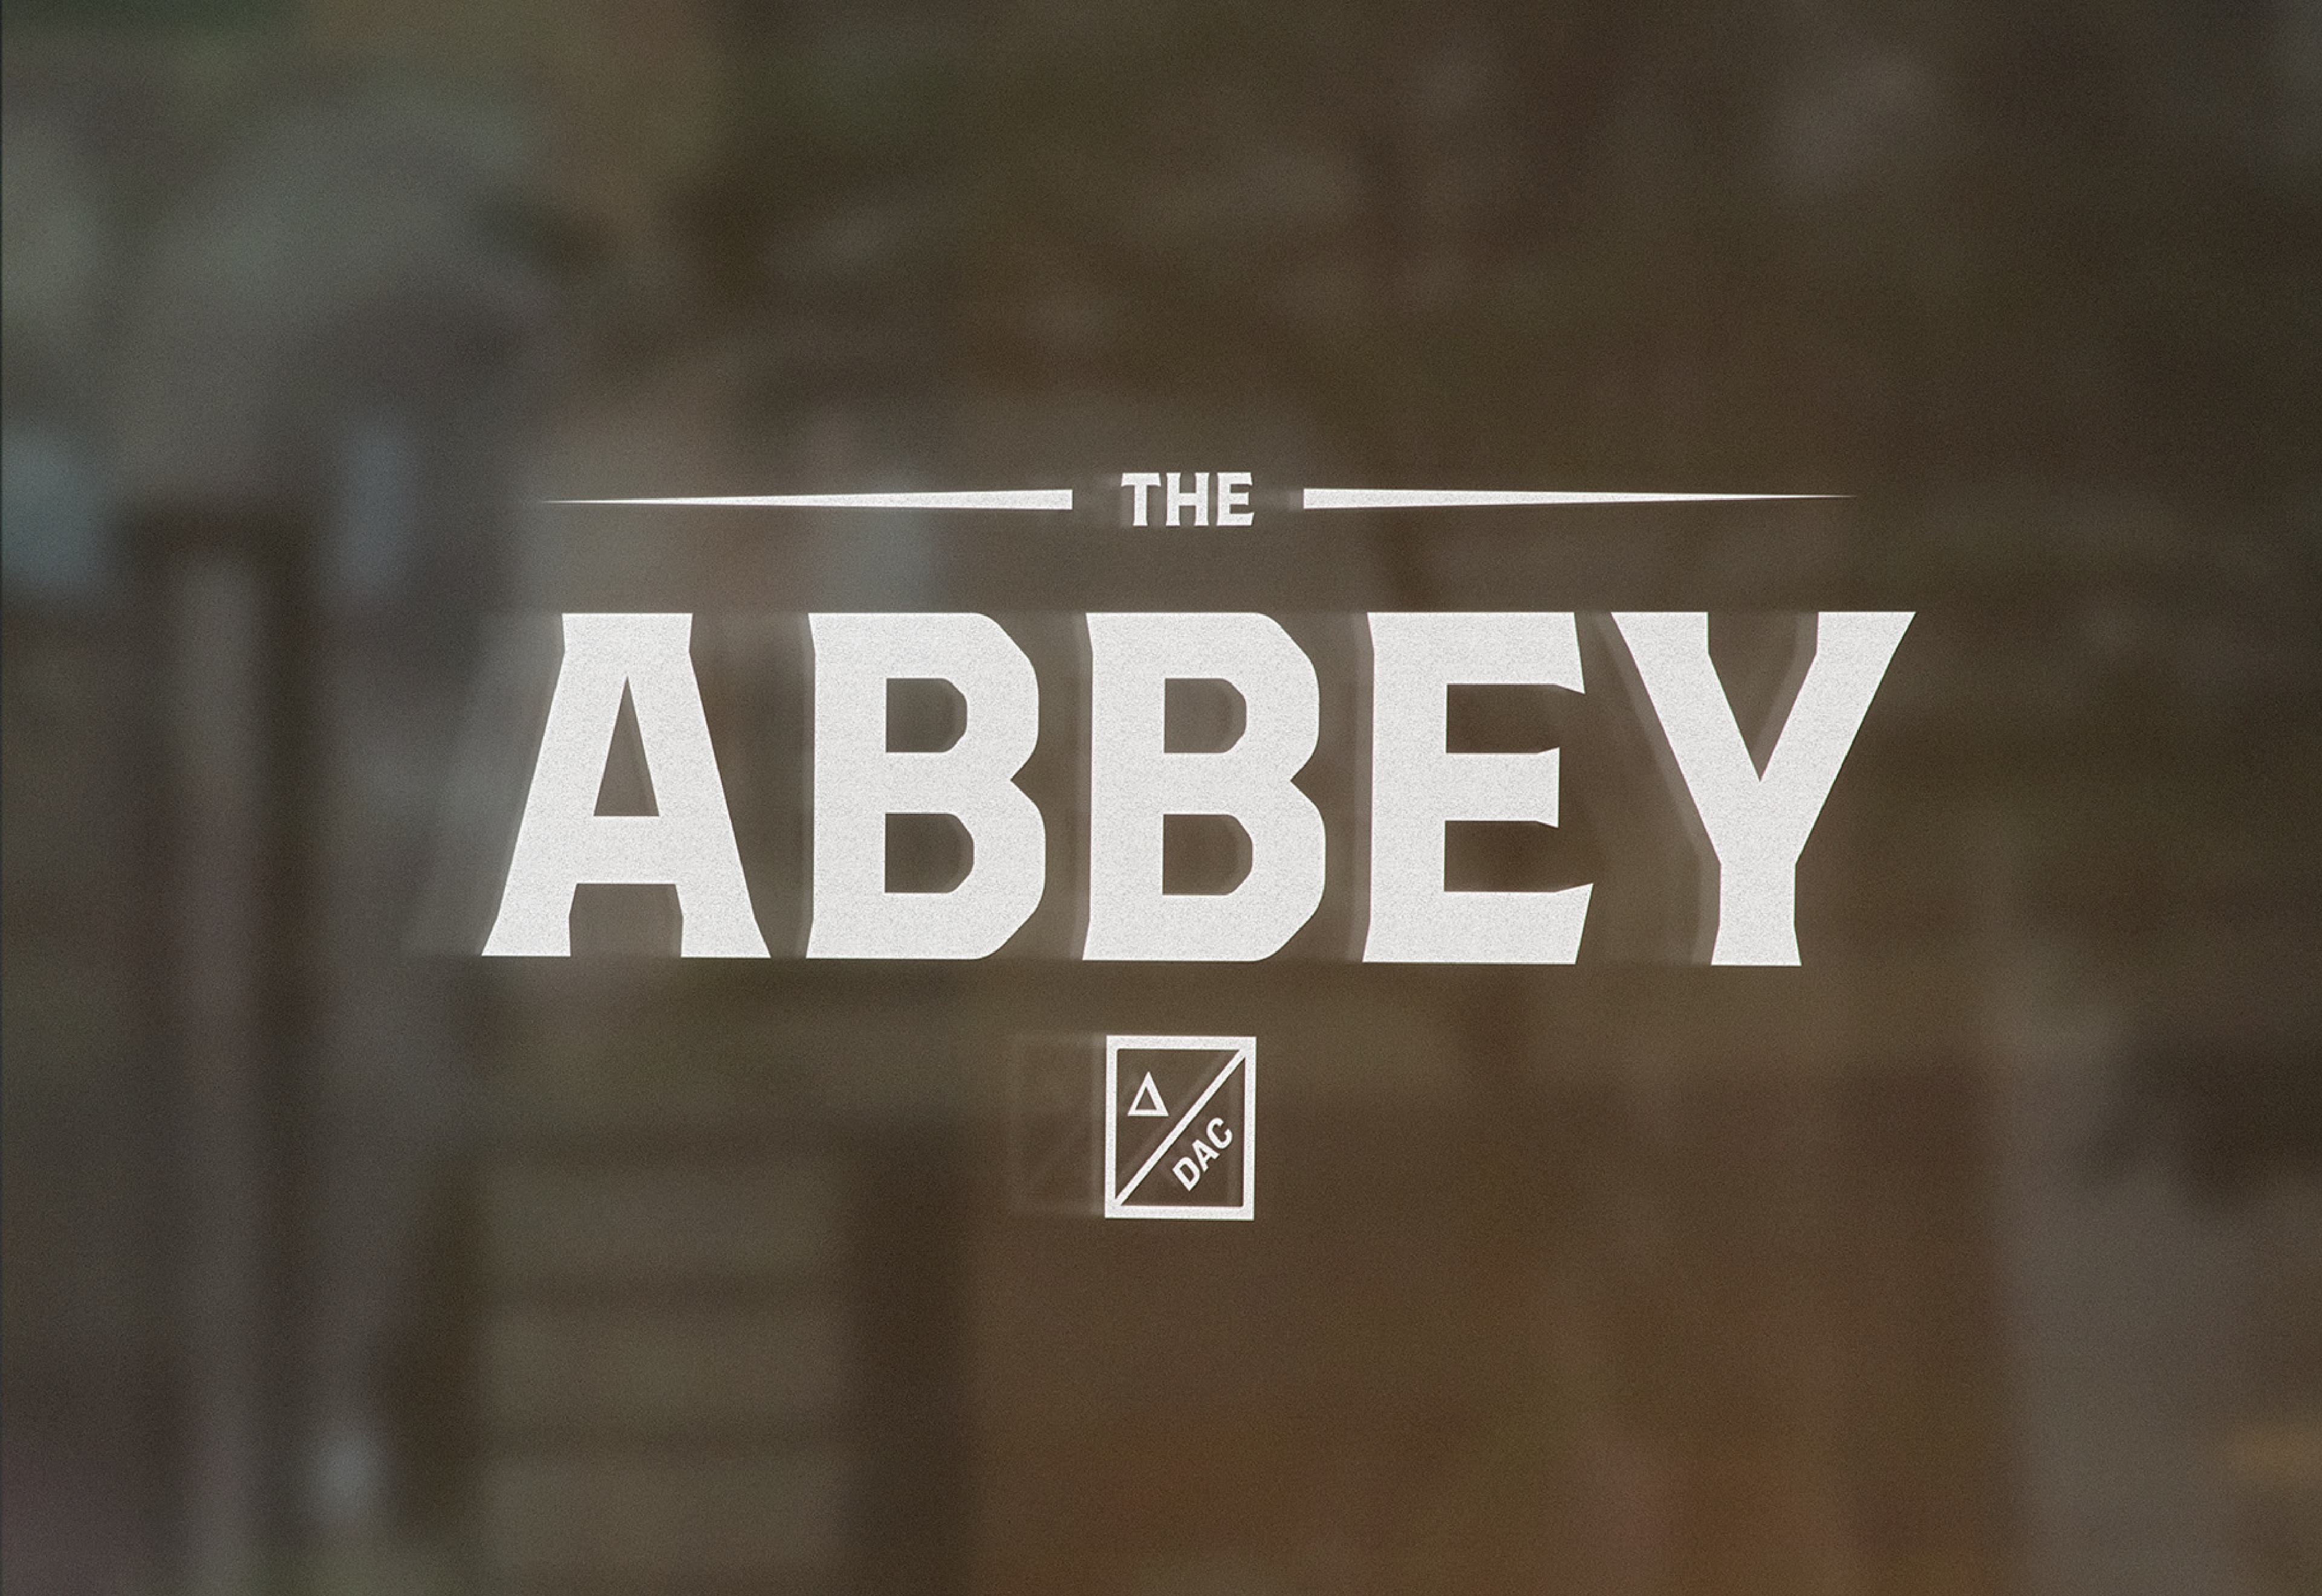 The Abbey stencil sign on a glass of a window.